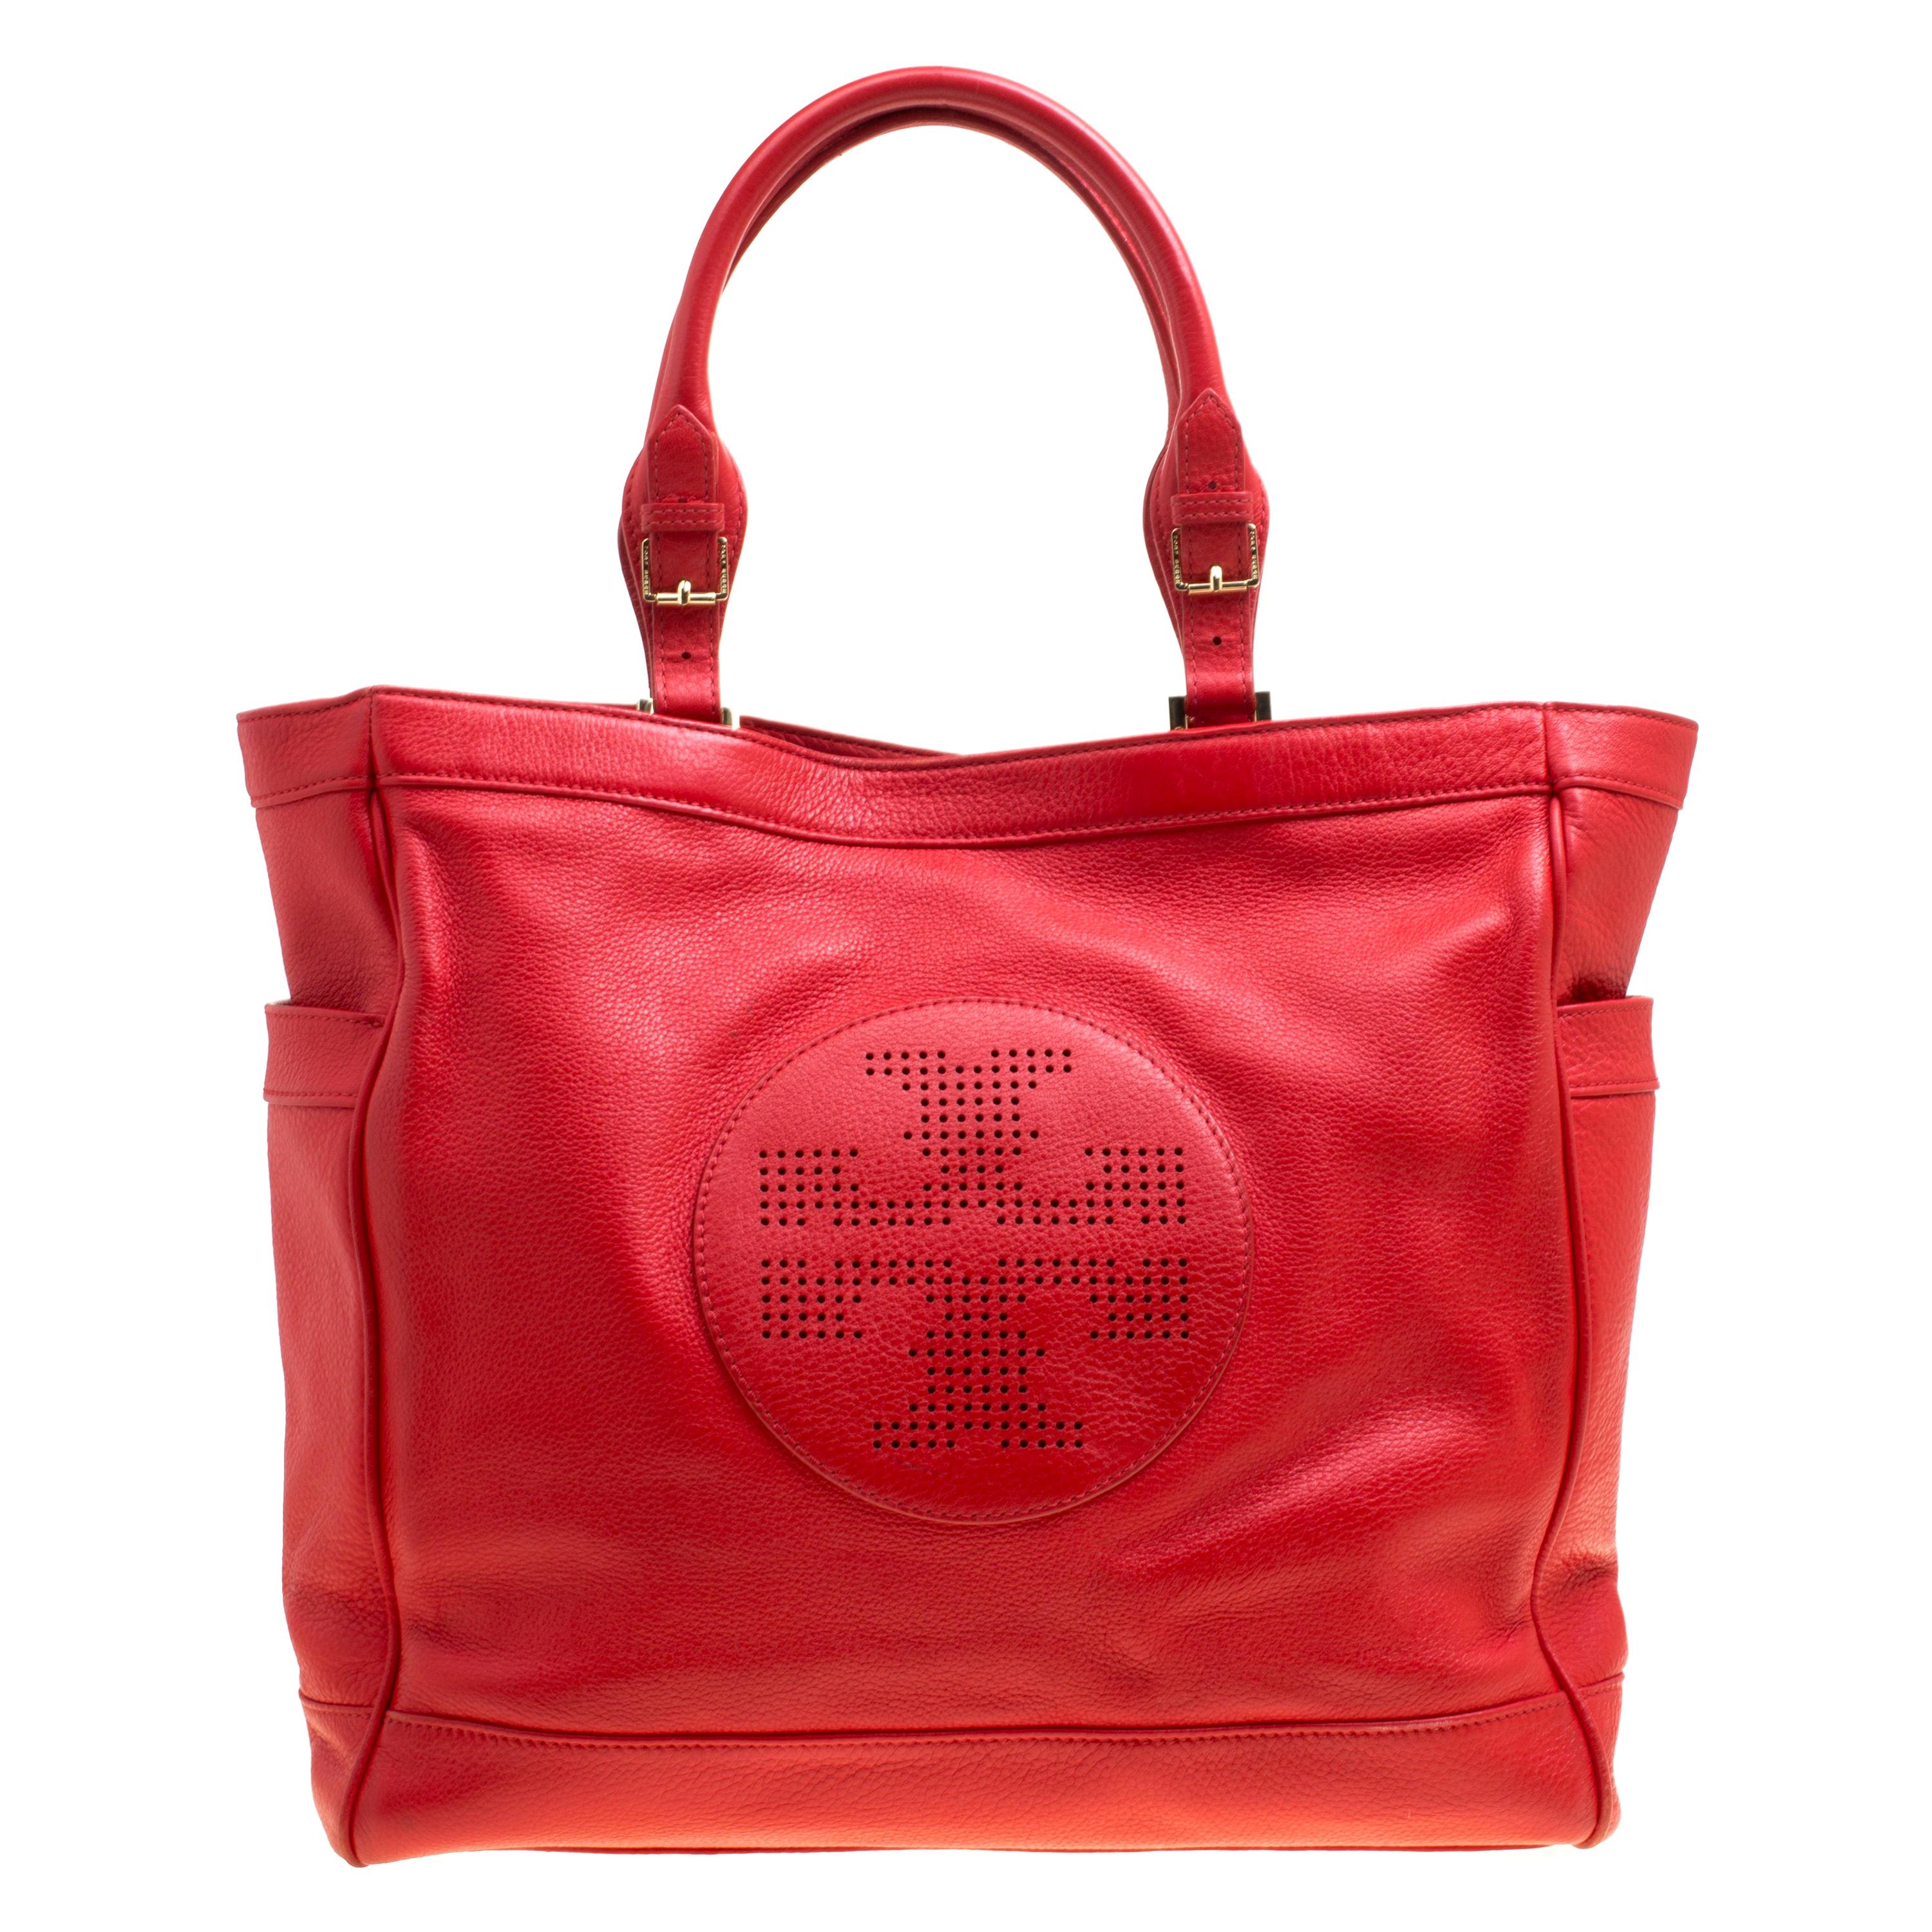 Tory Burch Red Leather Tote